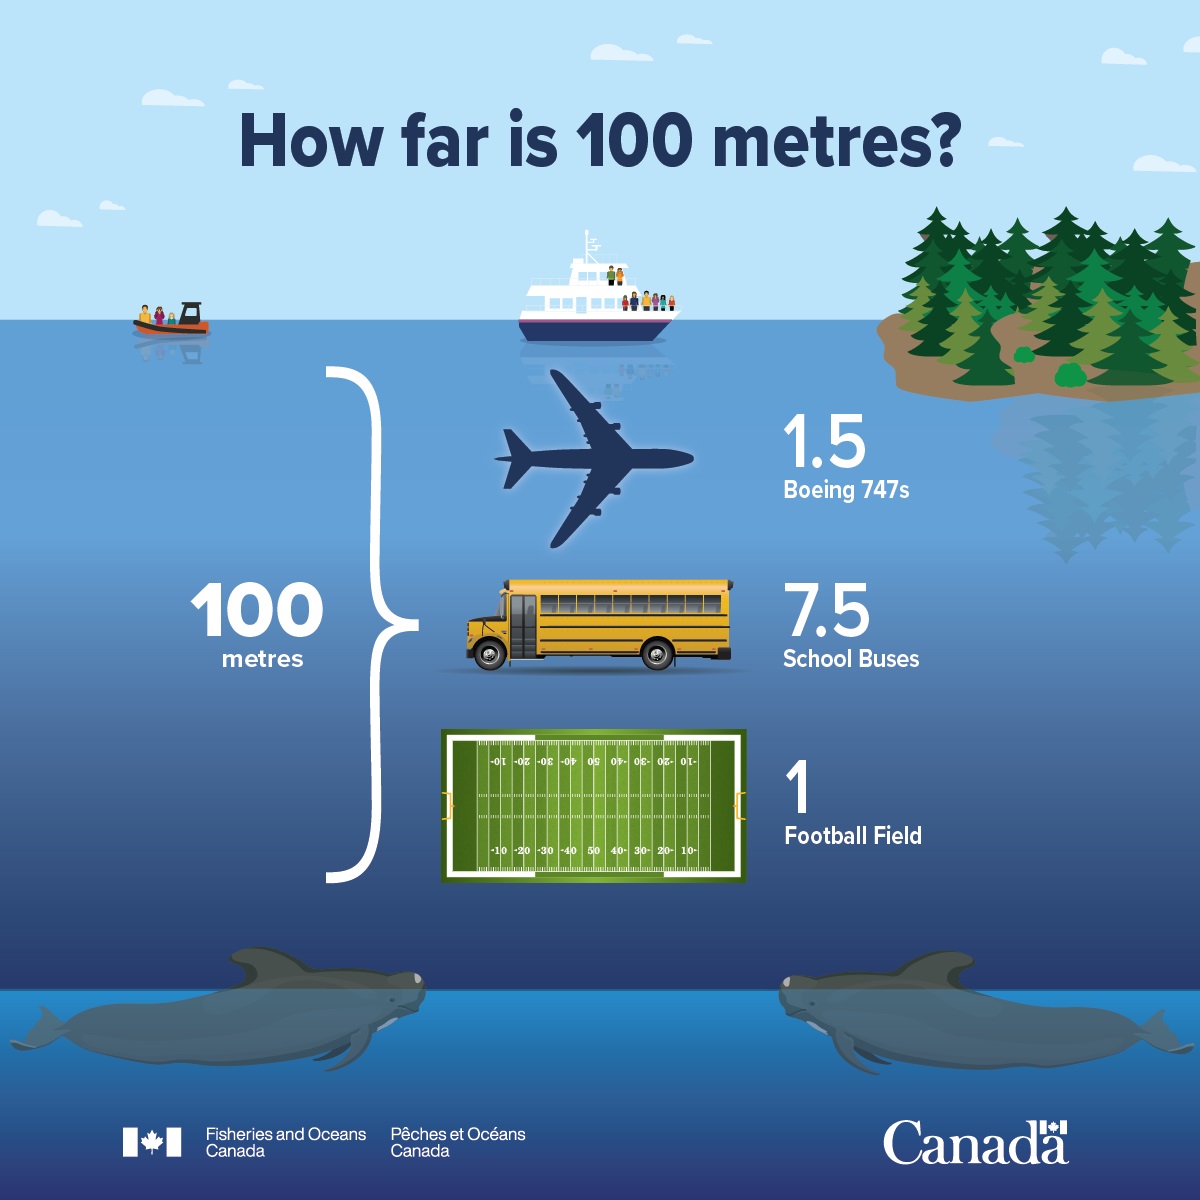 Infographic: How far is 200 metres?